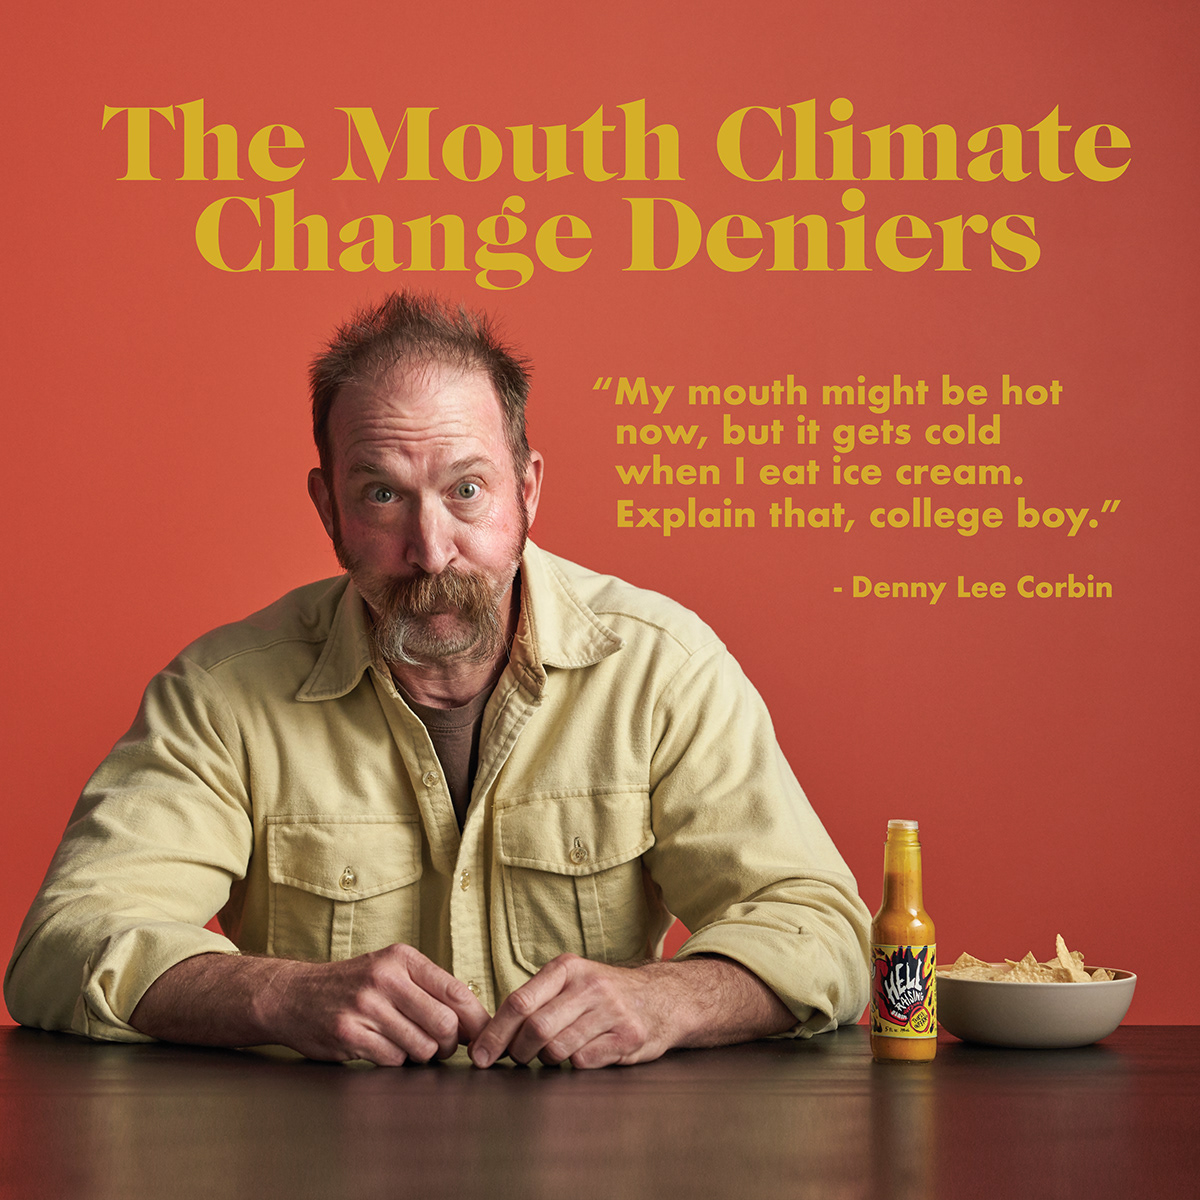 Advertising  climate hot sauce